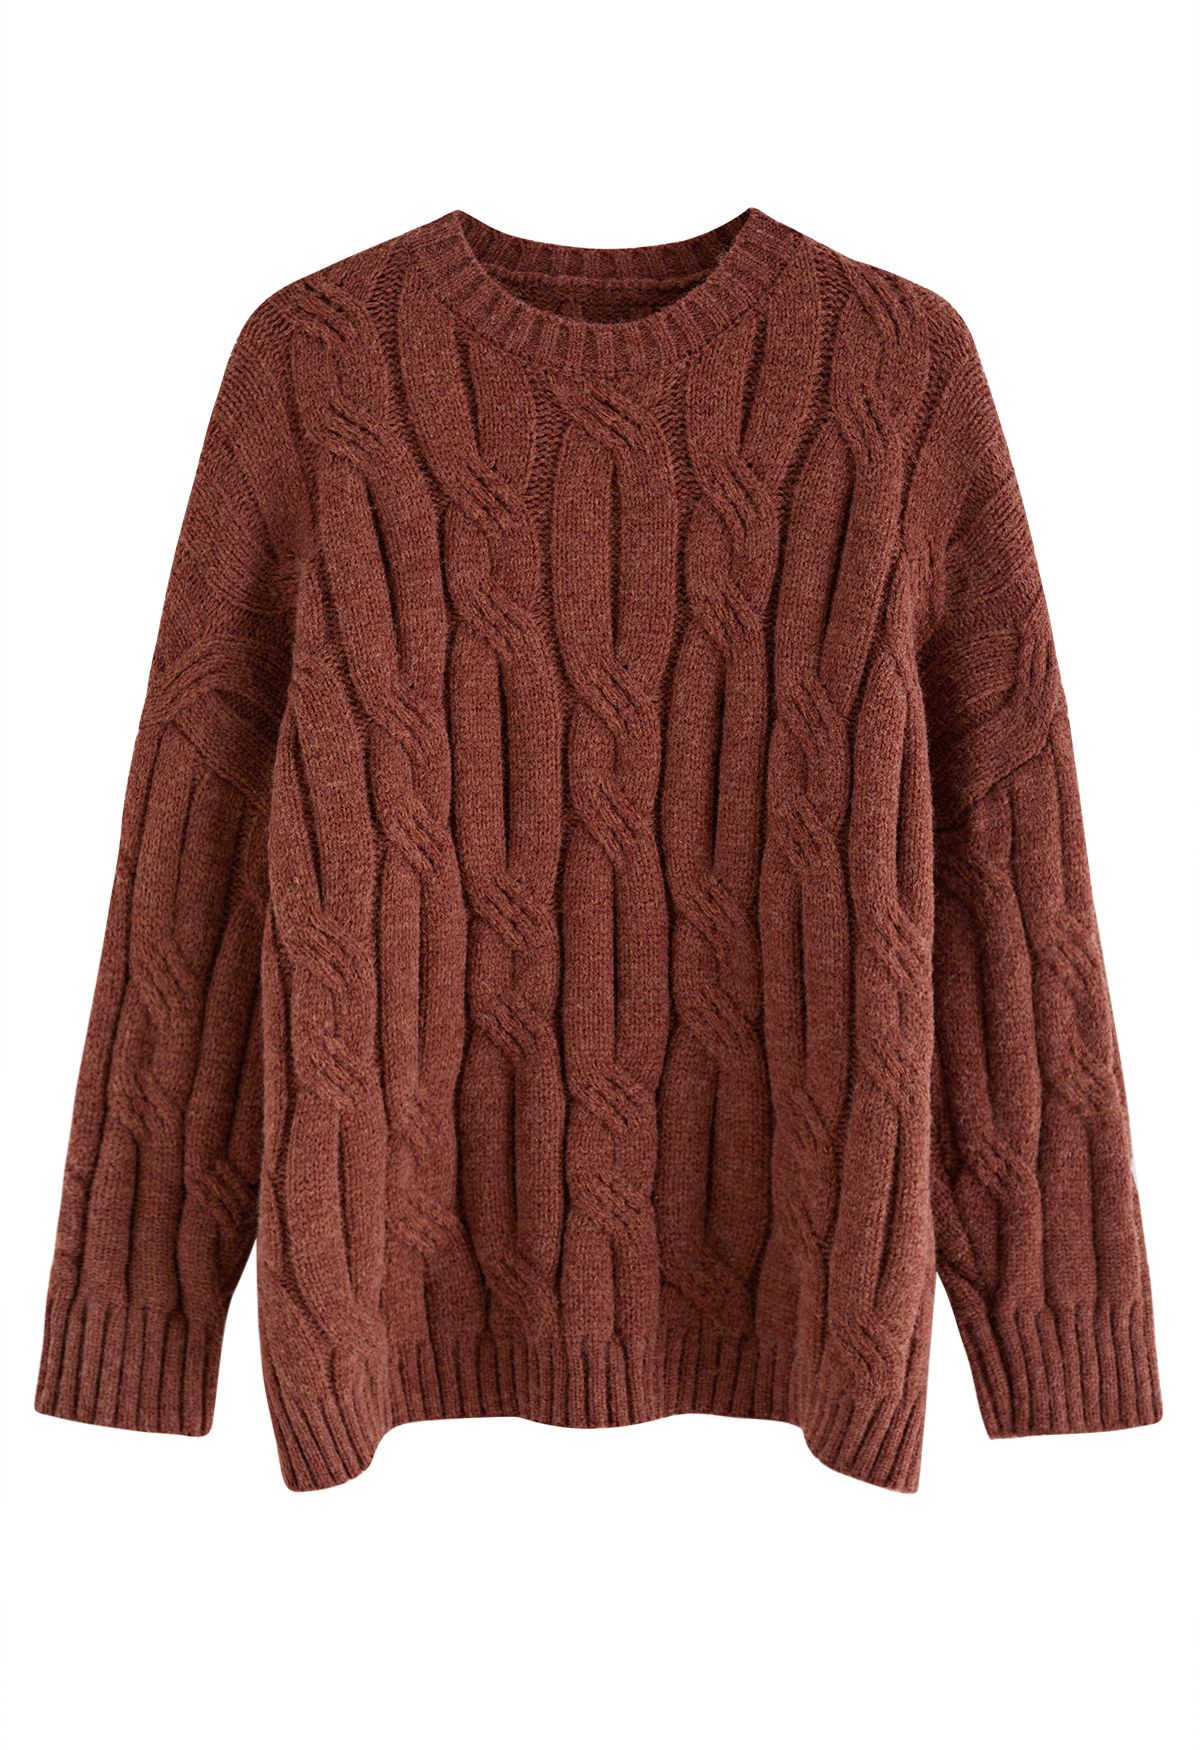 Braid Texture Round Neck Knit Sweater in Rust Red - Retro, Indie and ...